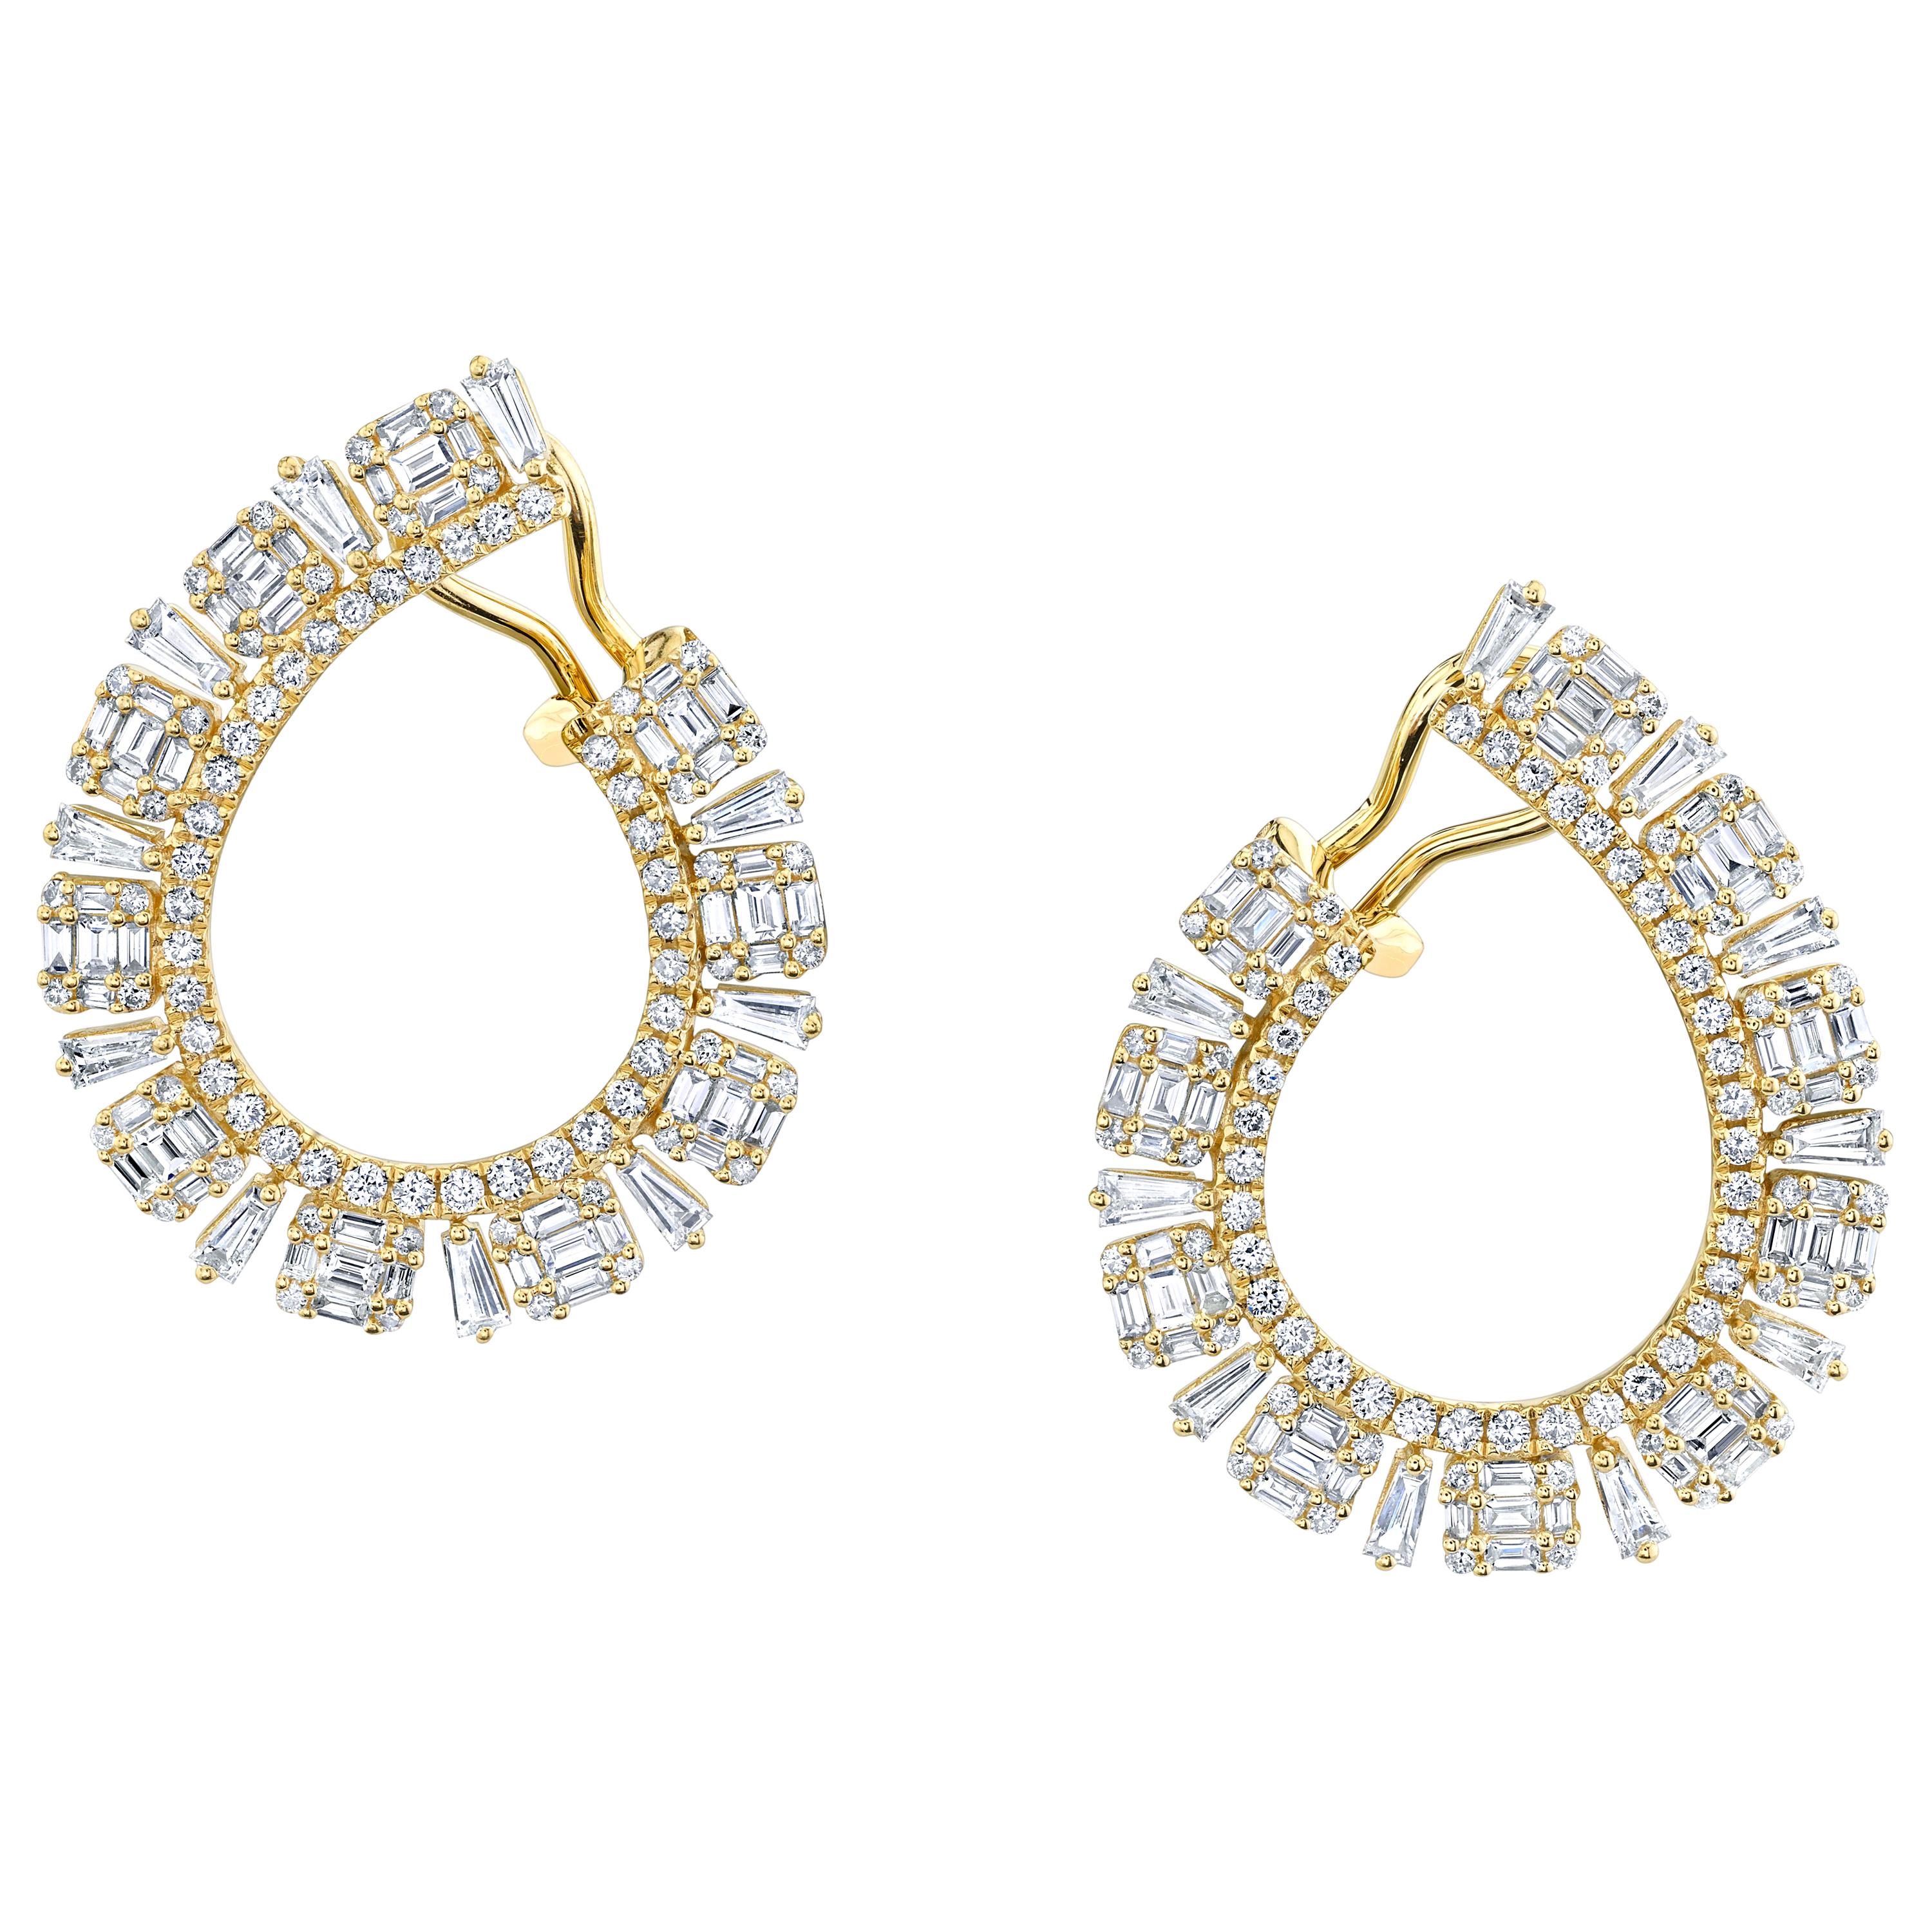 Baguette and Round Diamond Hoop Earrings in Yellow Gold, 3.12 Carats Total For Sale